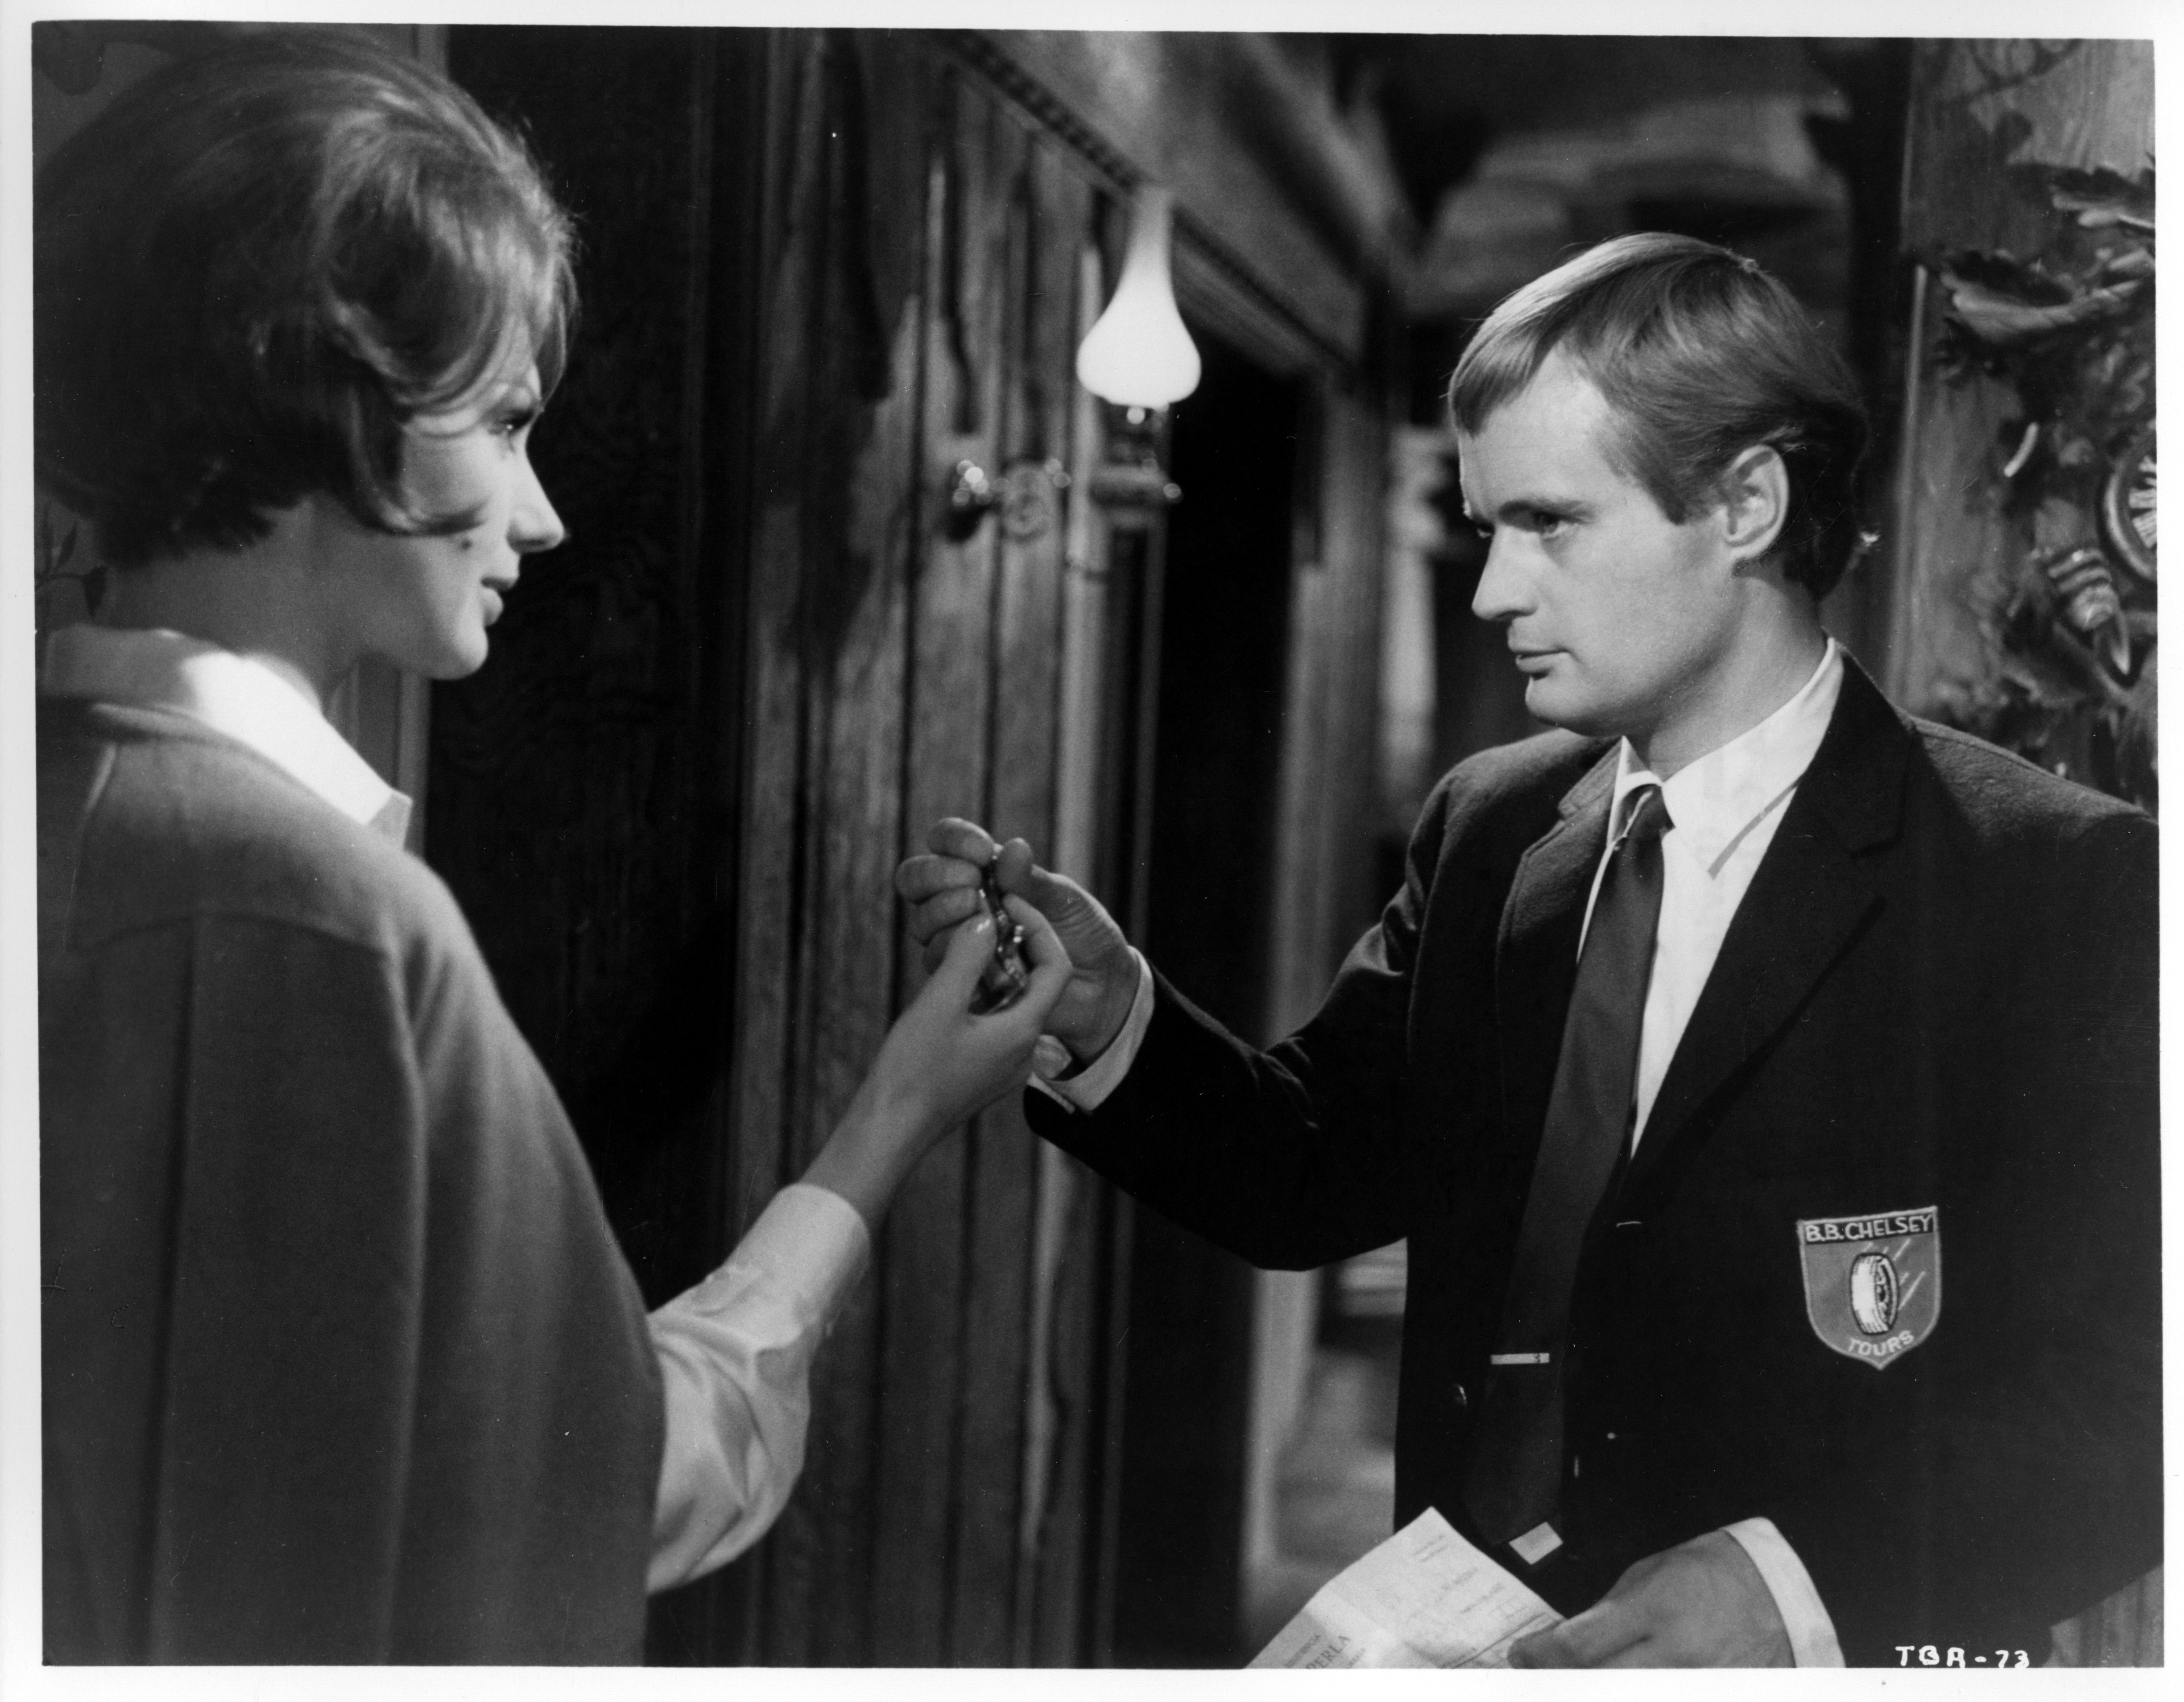 David McCallum shows Sylva Koscina her room in a scene from the MGM movie "Three Bites of the Apple", circa 1967. | Source: Getty Images